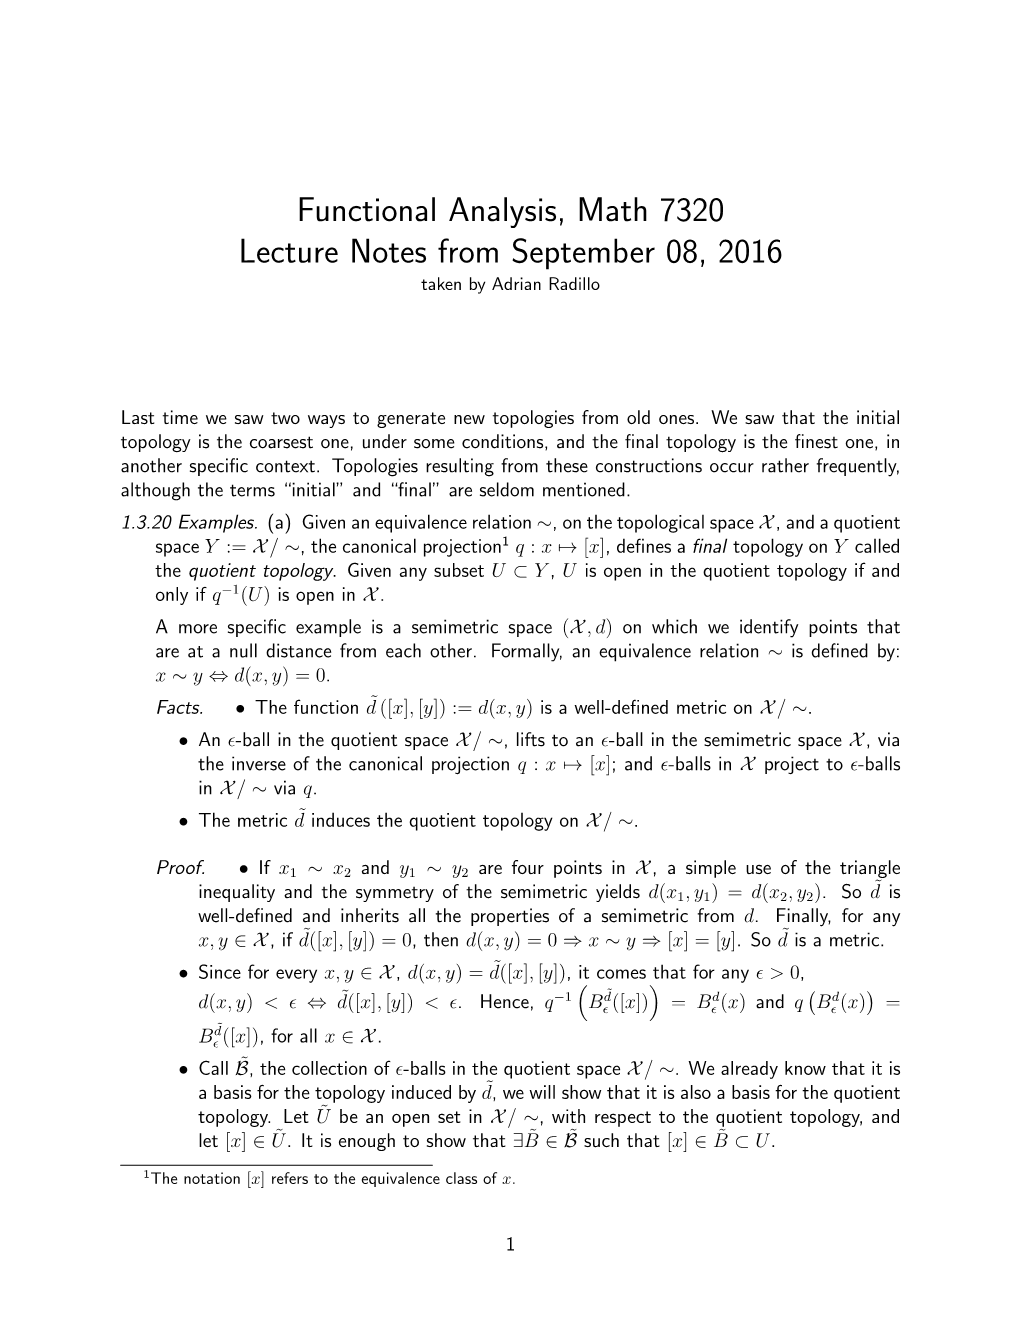 Functional Analysis, Math 7320 Lecture Notes from September 08, 2016 Taken by Adrian Radillo